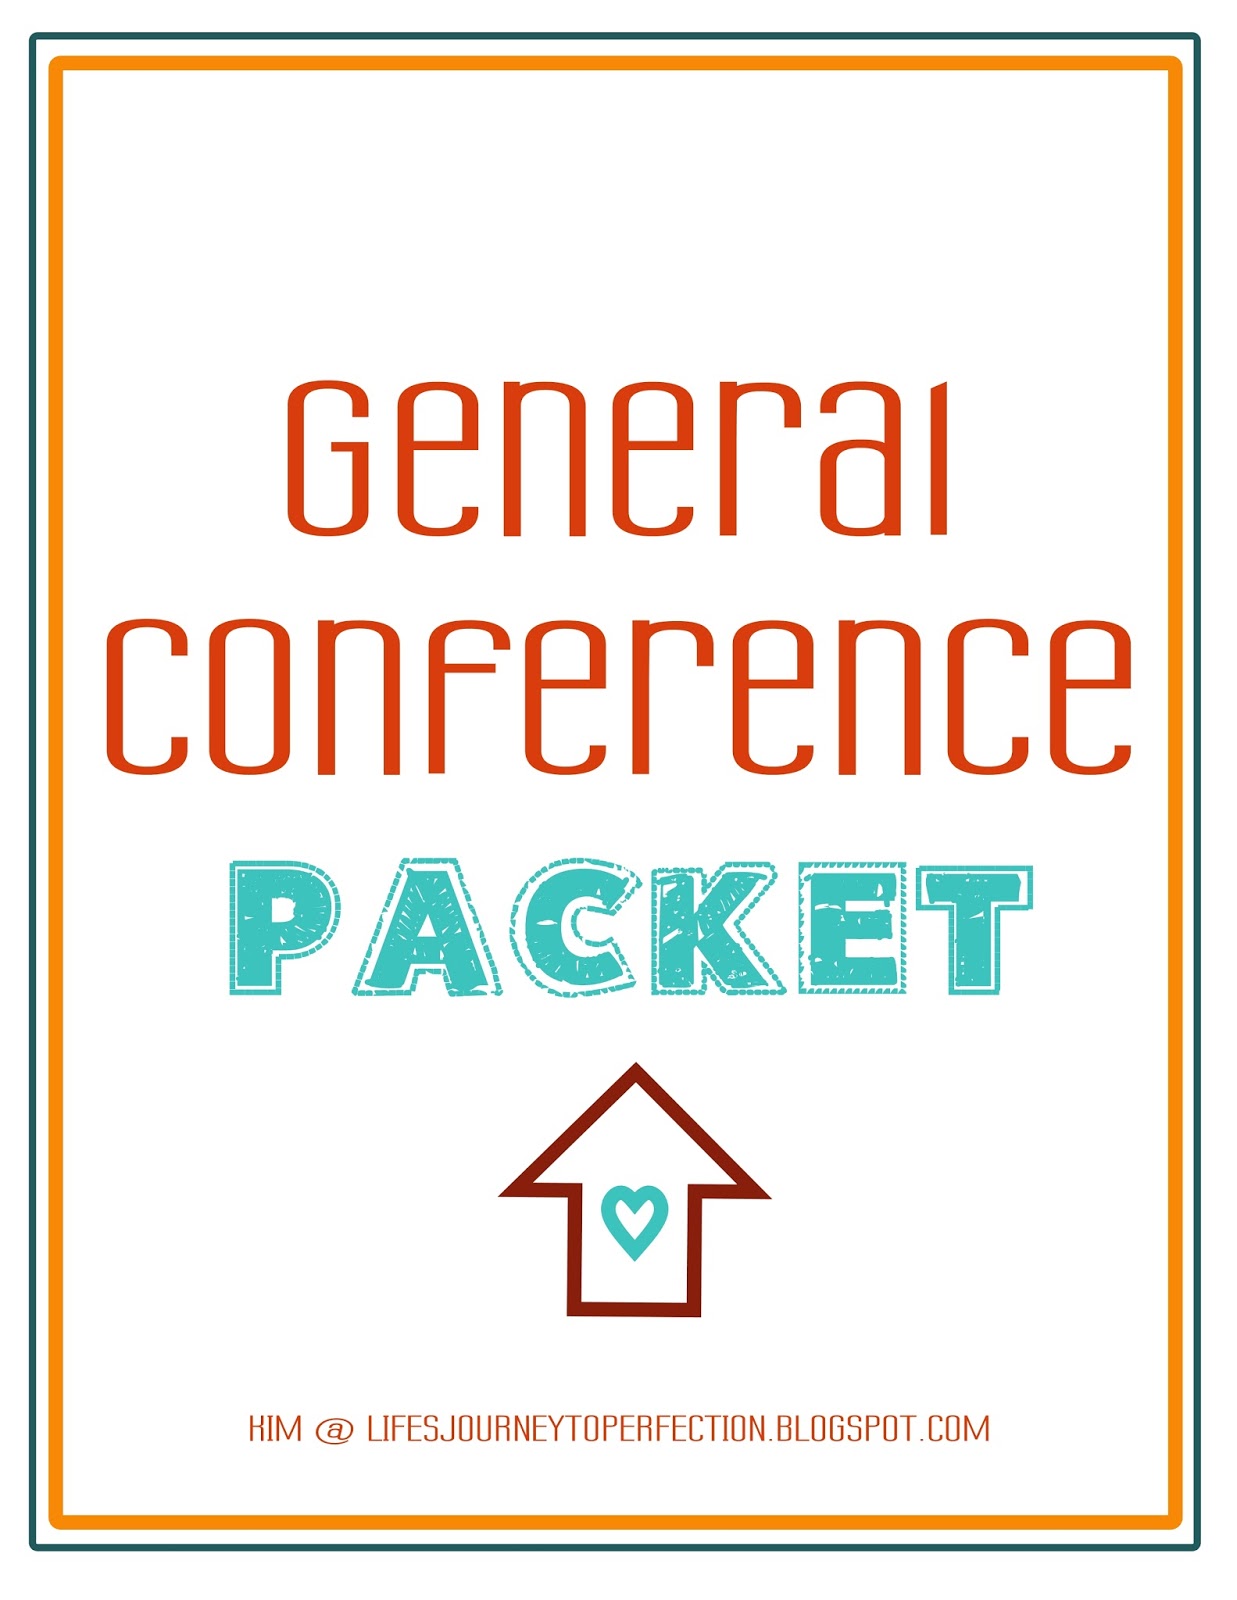 Life's Journey To Perfection General Conference Ideas for Fall 2015